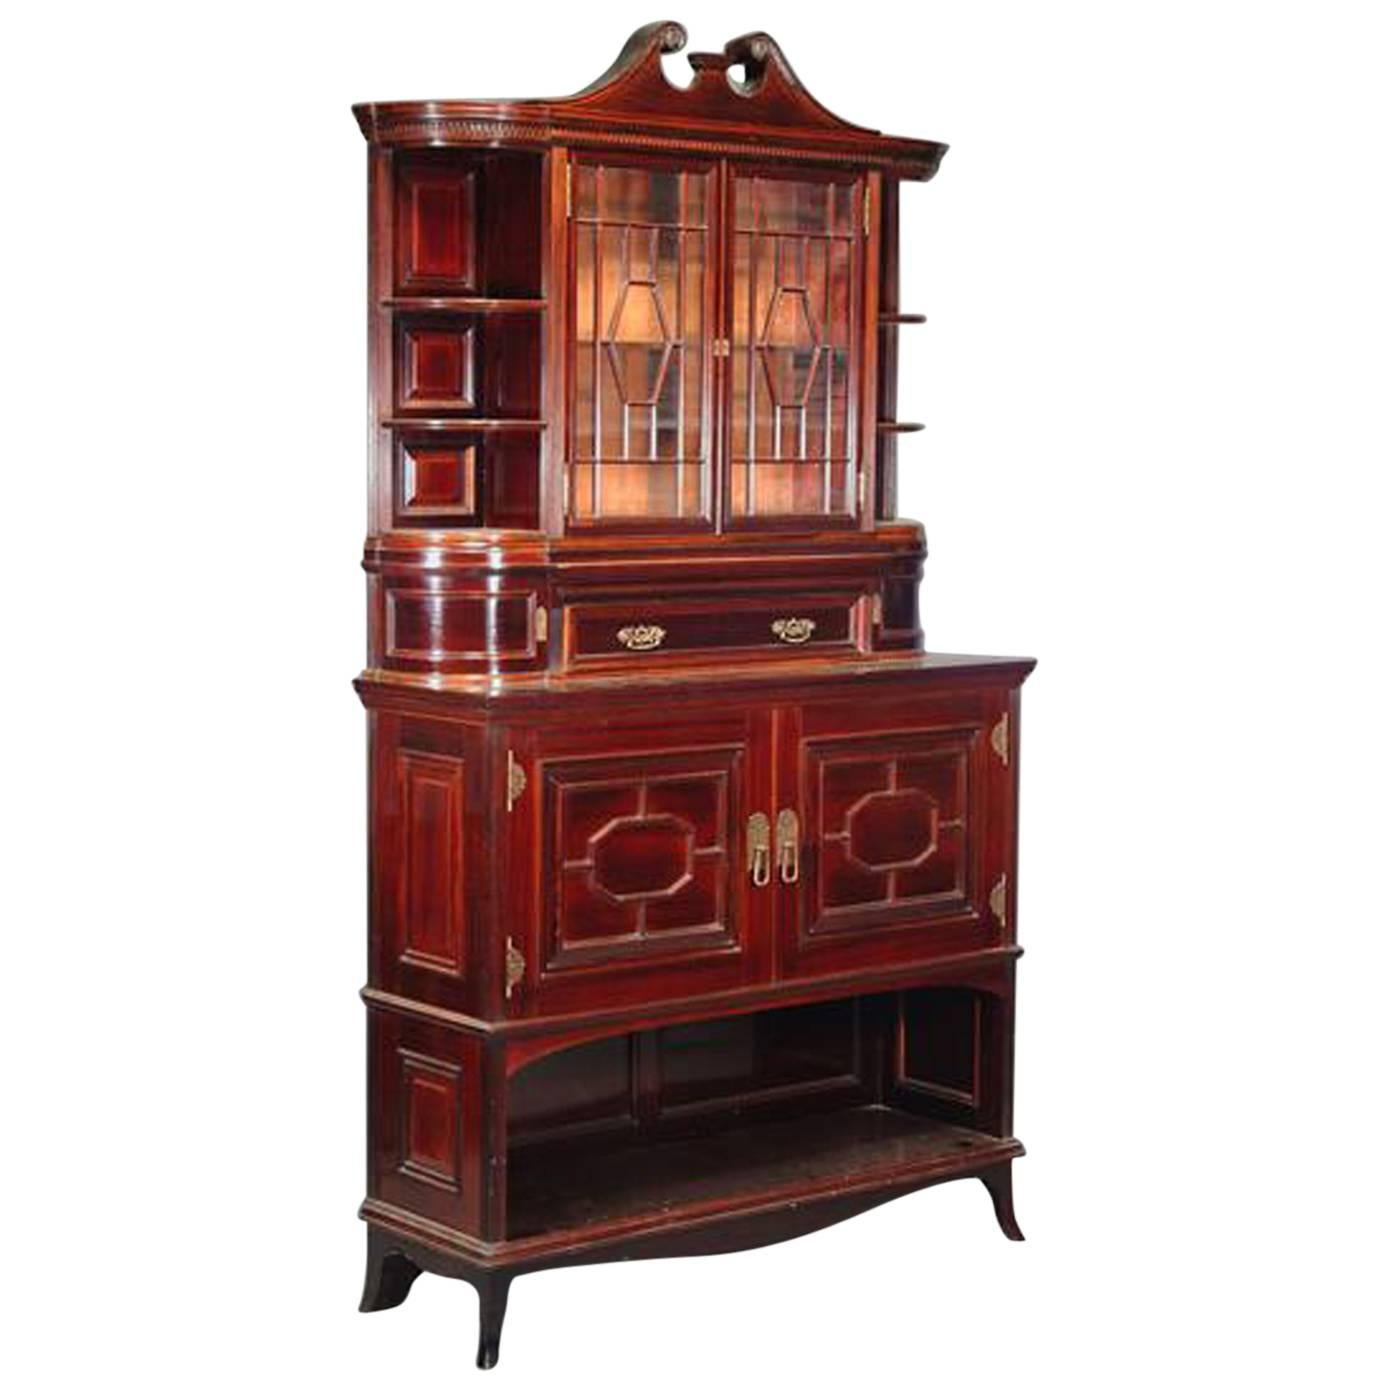 E W Godwin made by Collinson & Lock of London. Eaton Hall Rosewood China Cabinet